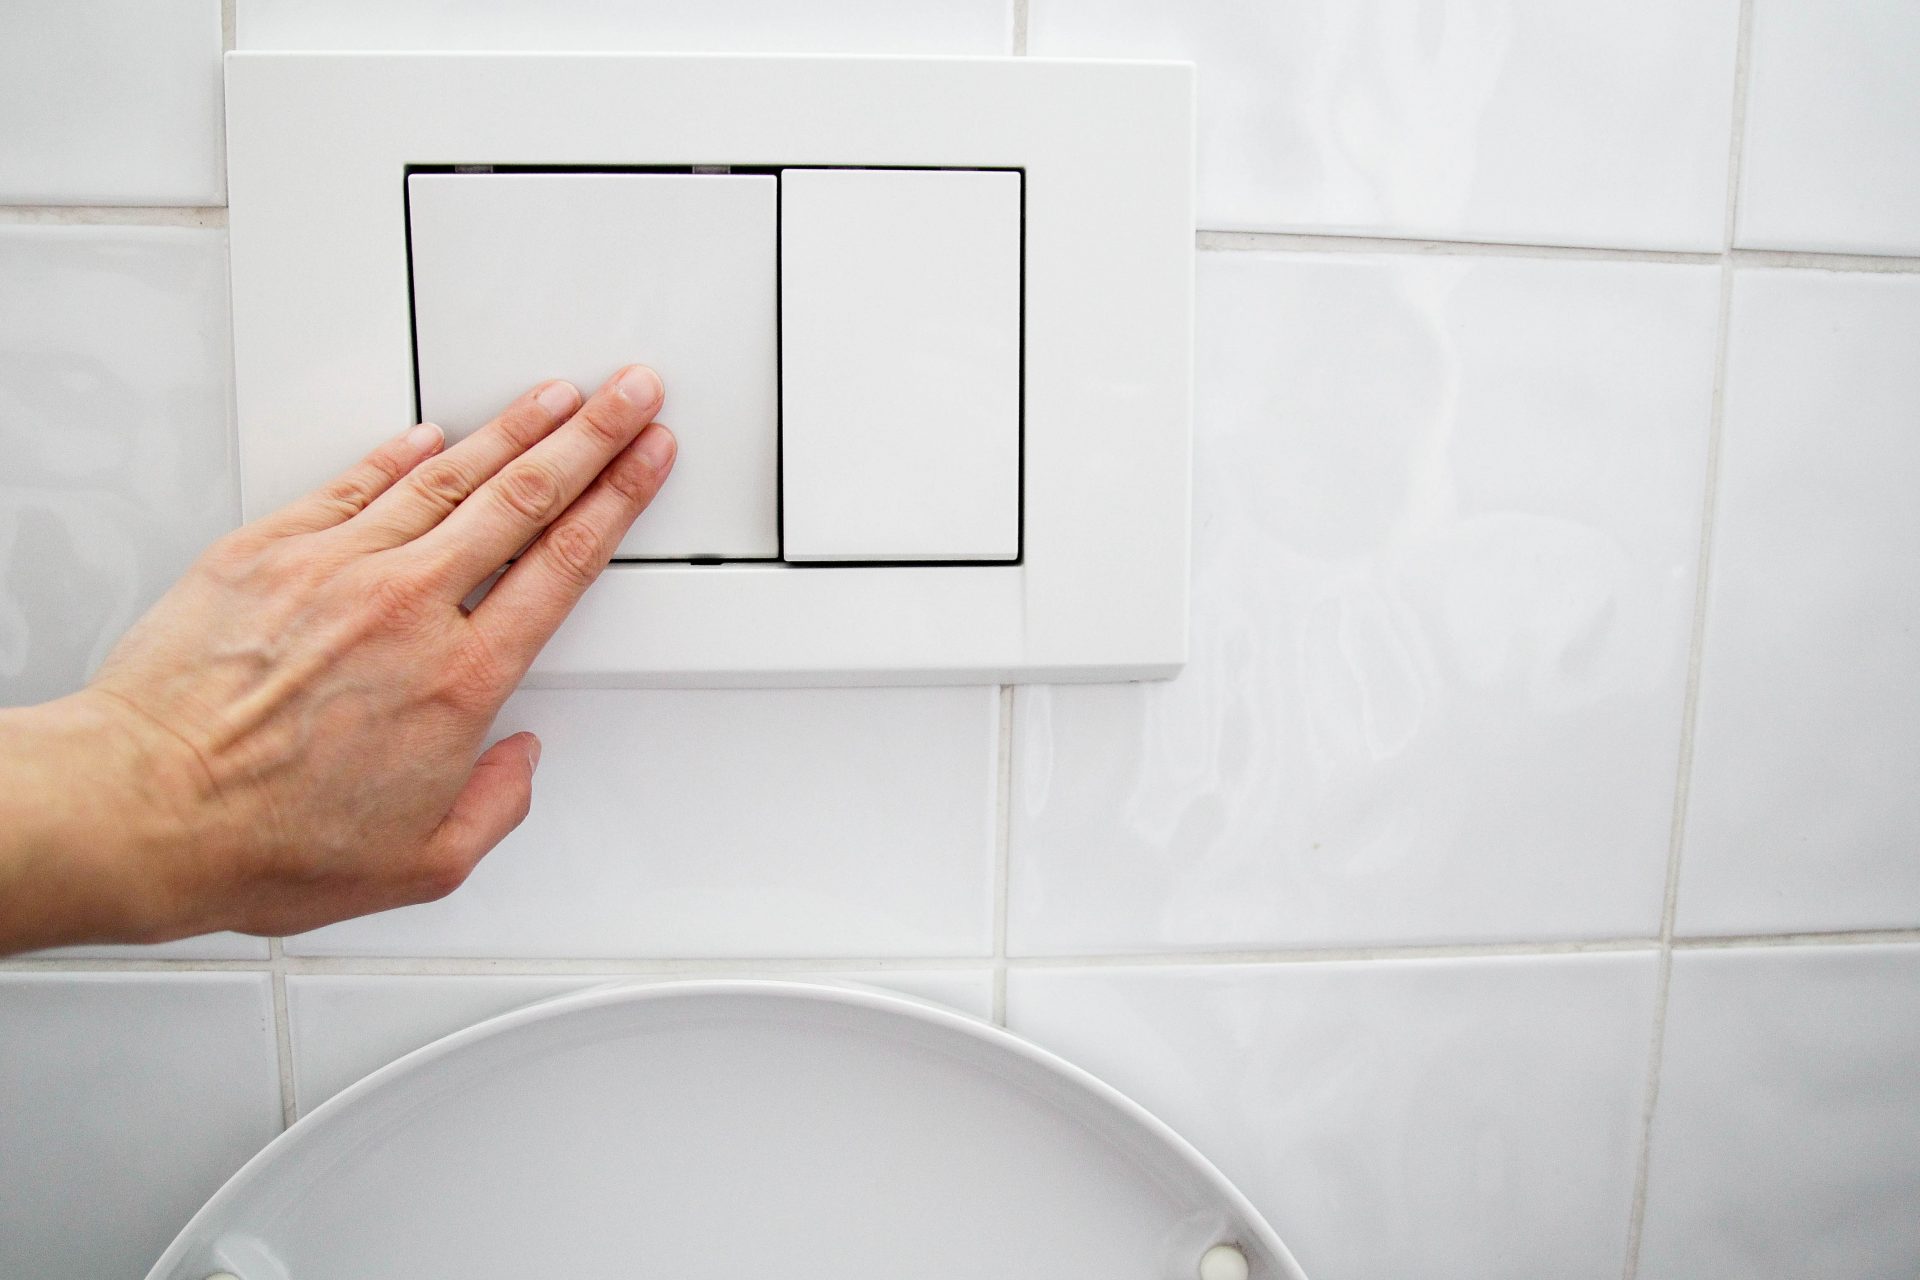 Not lowering the toilet lid could be very dangerous for your health